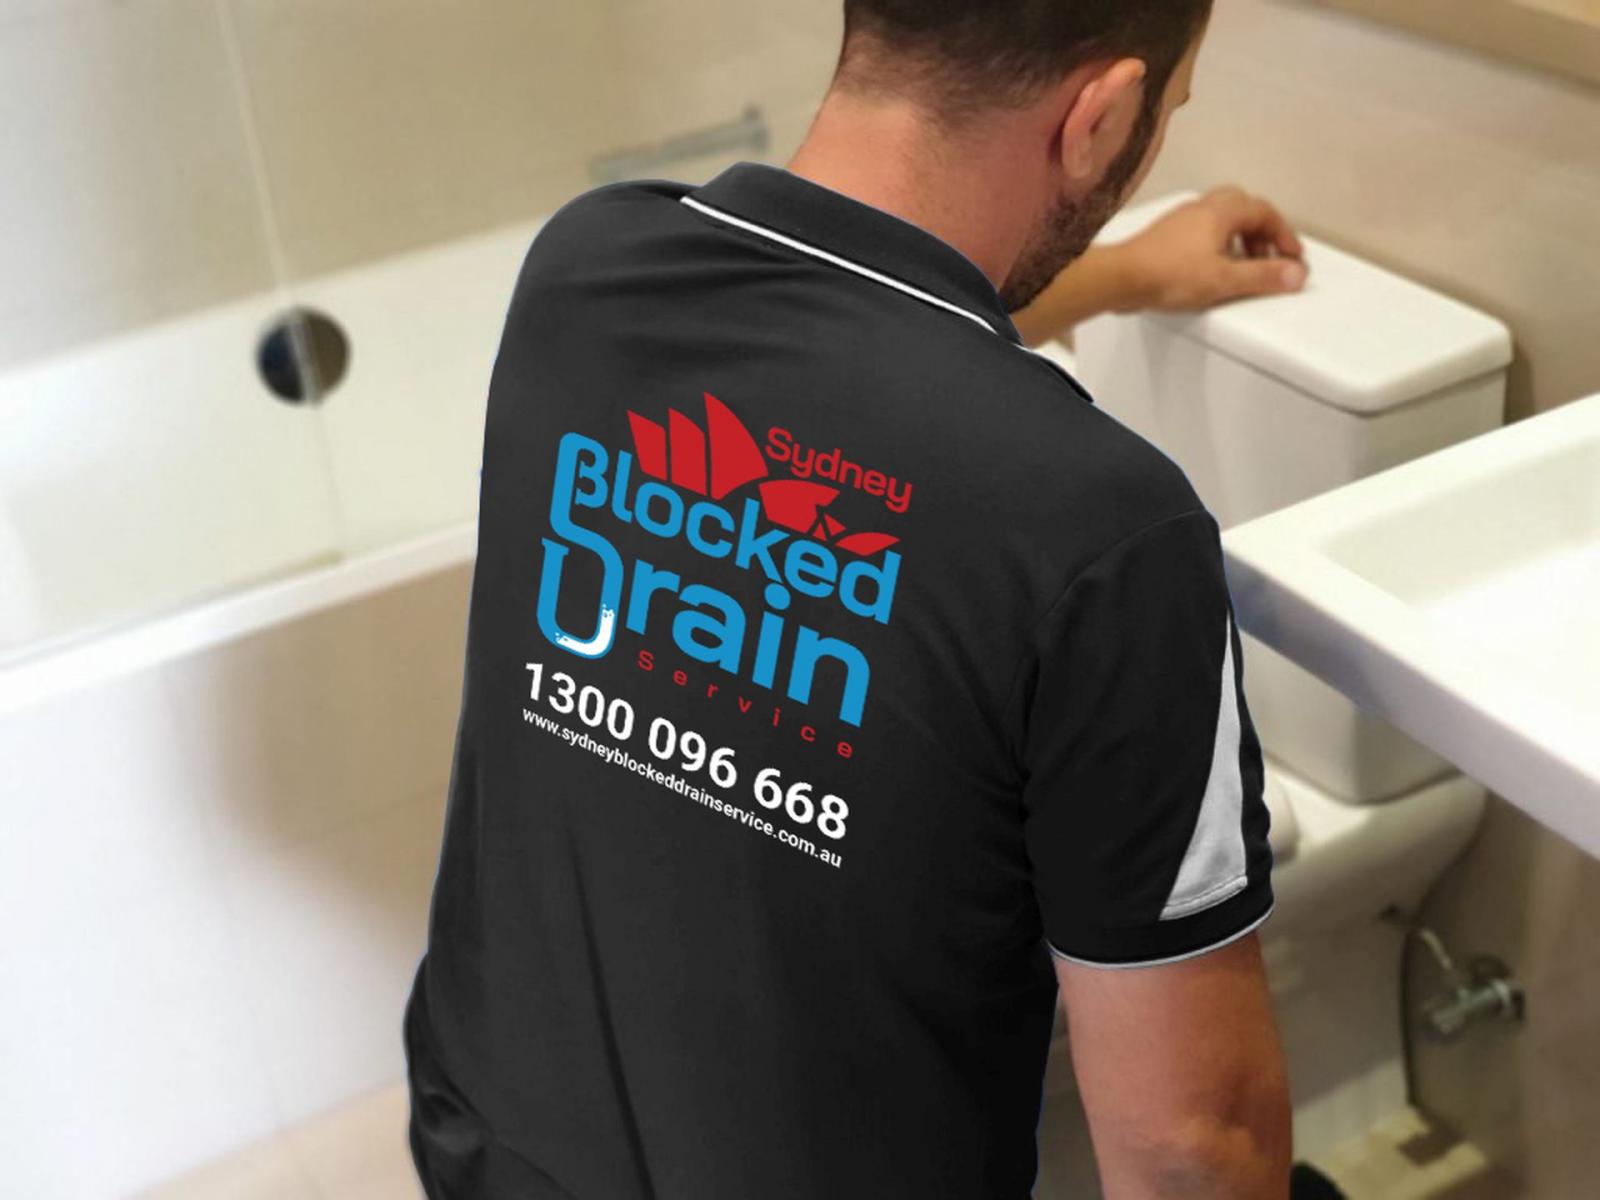 Electric Eel Drain Cleaning